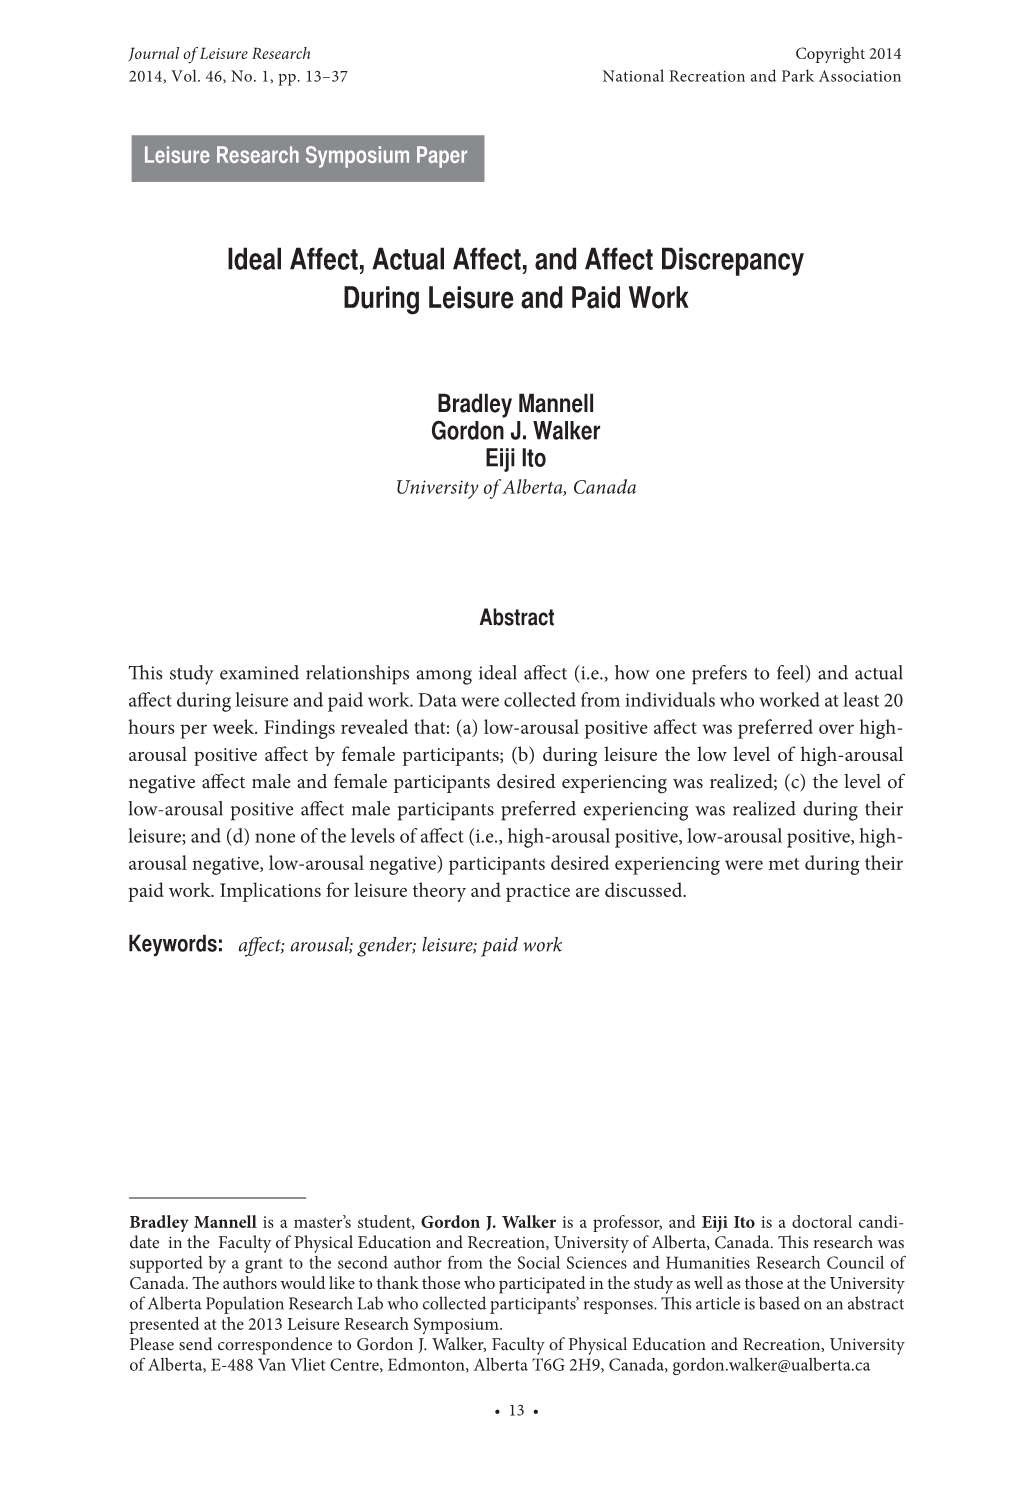 Ideal Affect, Actual Affect, and Affect Discrepancy During Leisure and Paid Work